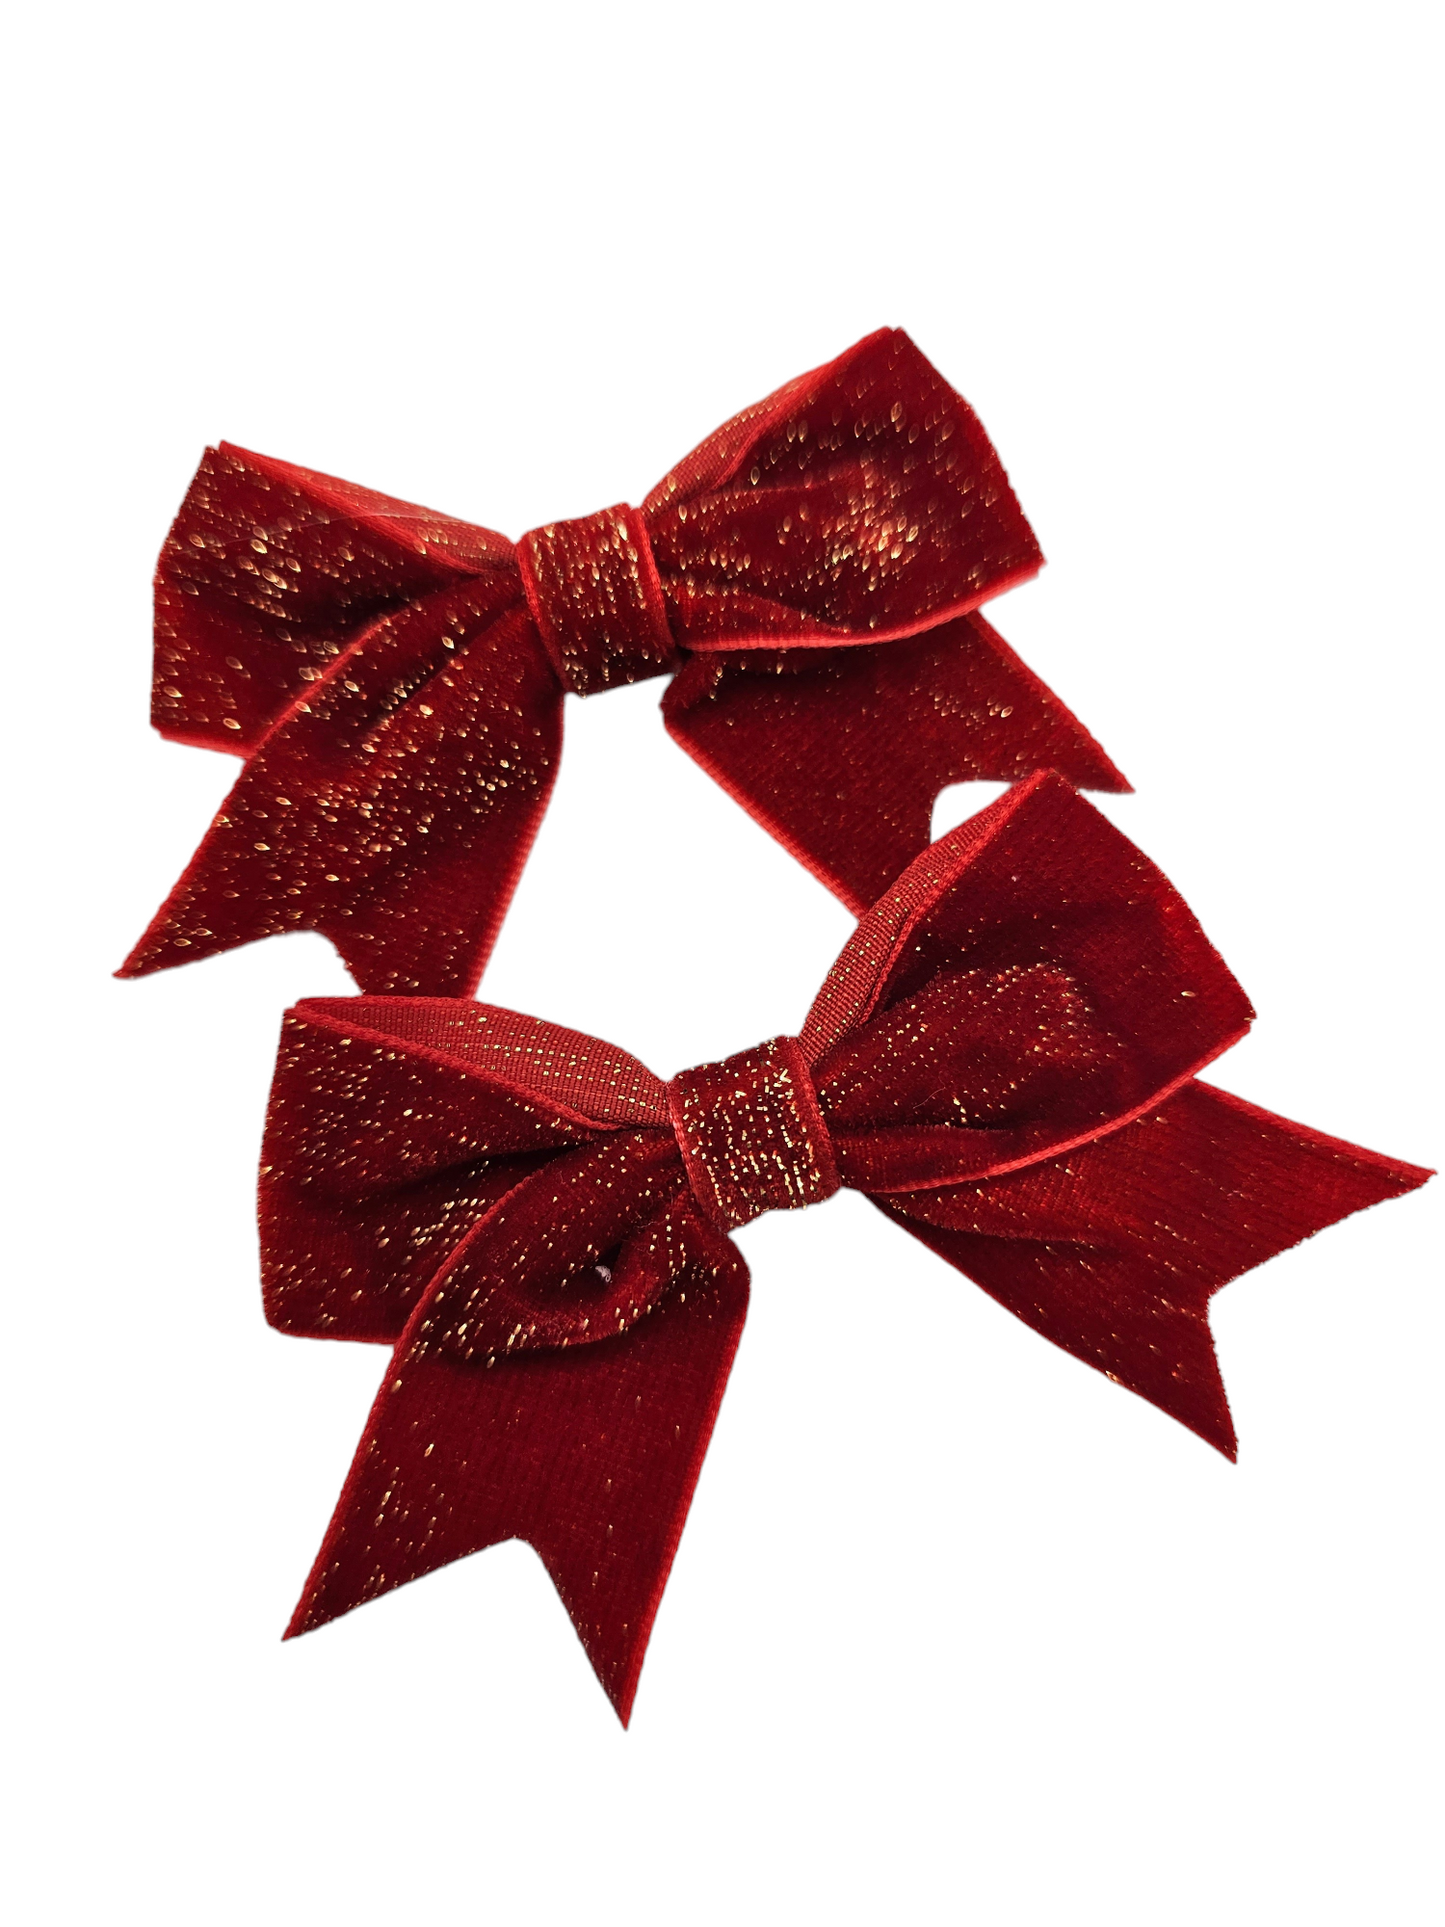 Pair of Red Velvet Sparkle 3.5 Inch Bow Clips - Christmas Collection - Betty Brown Boutique Ltd